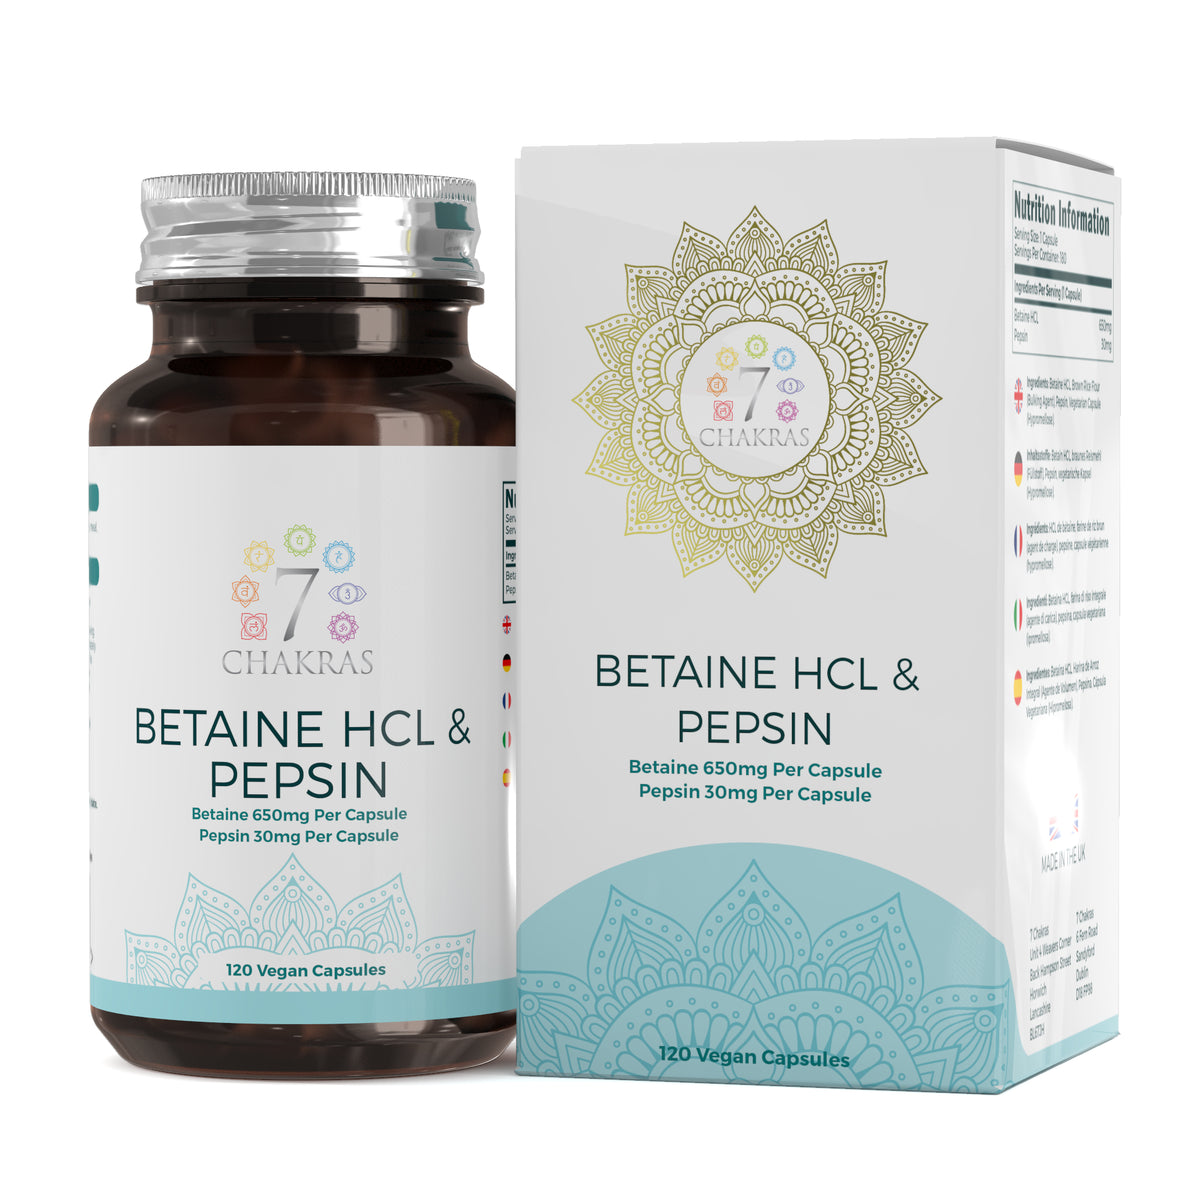 7 Chakras Betaine HCL & Pepsin 650mg Capsules For Digestive Health